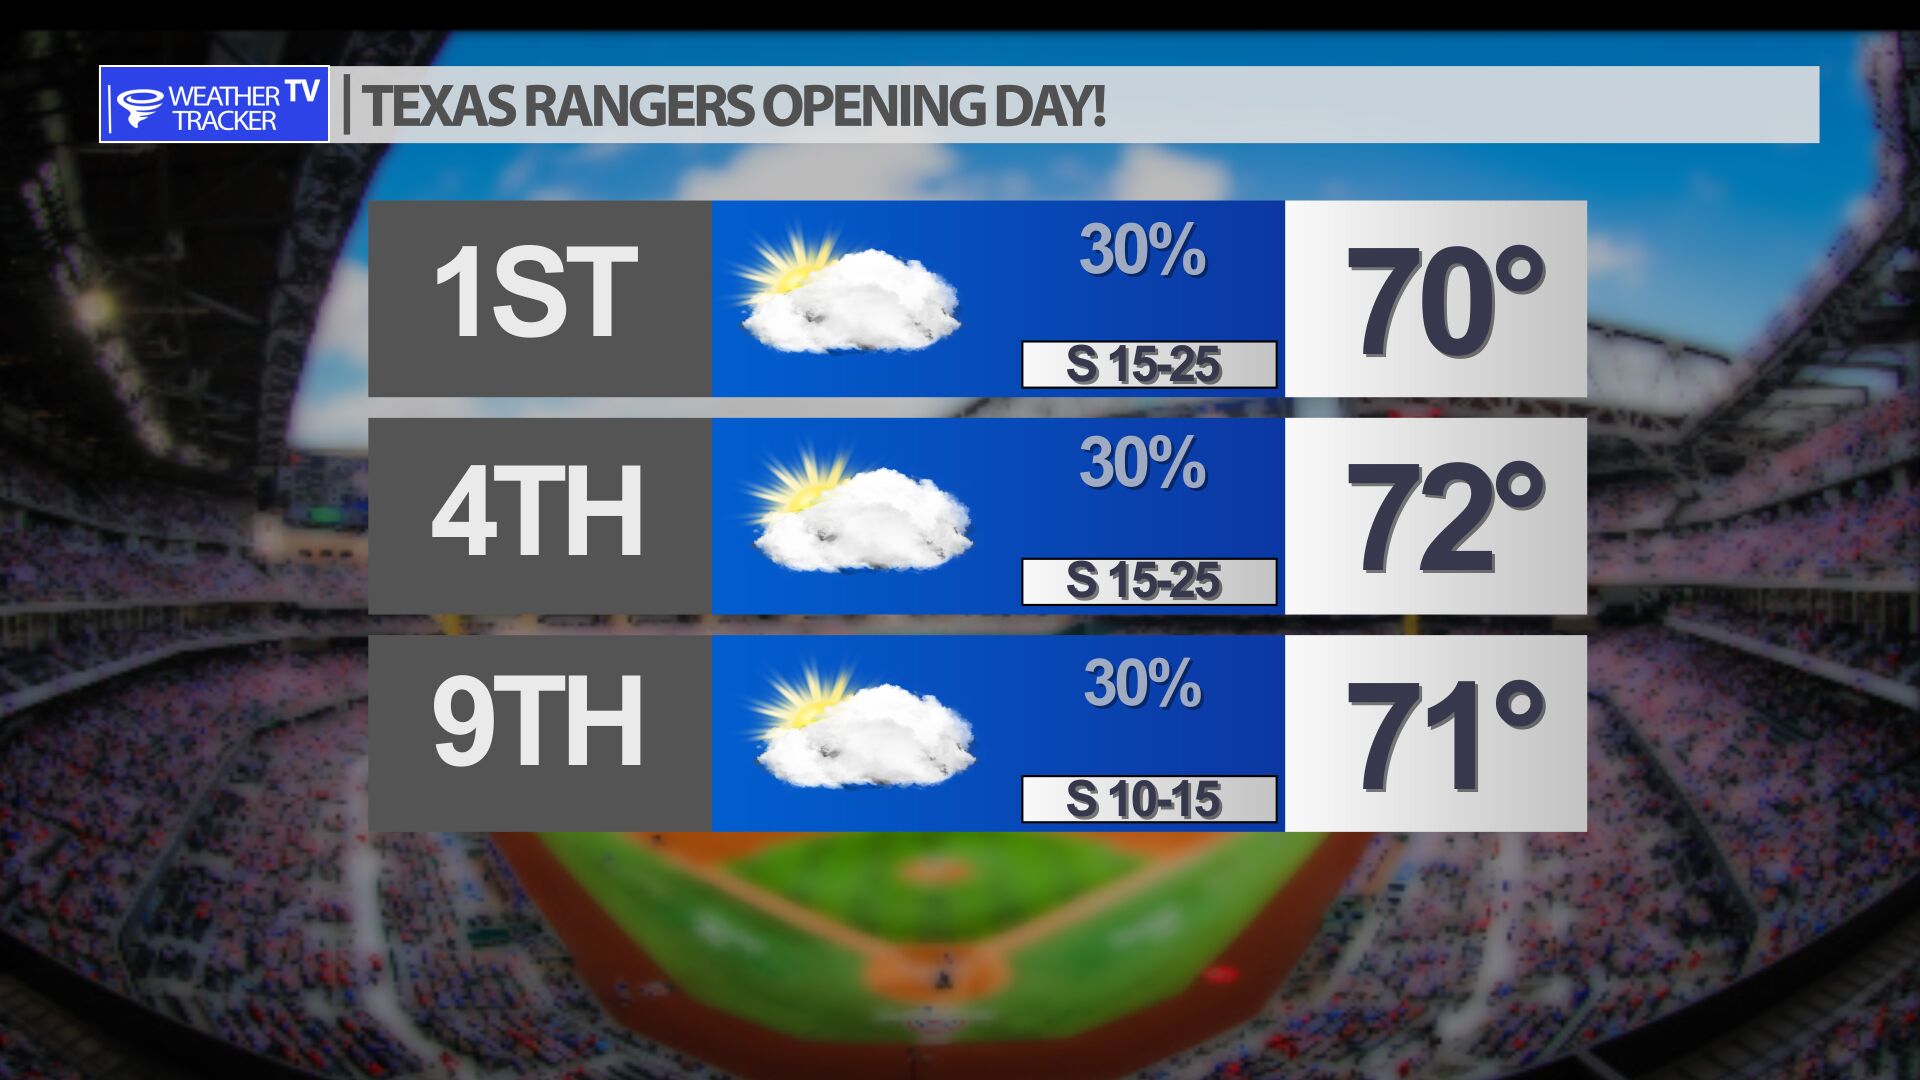 Rangers Opening Day